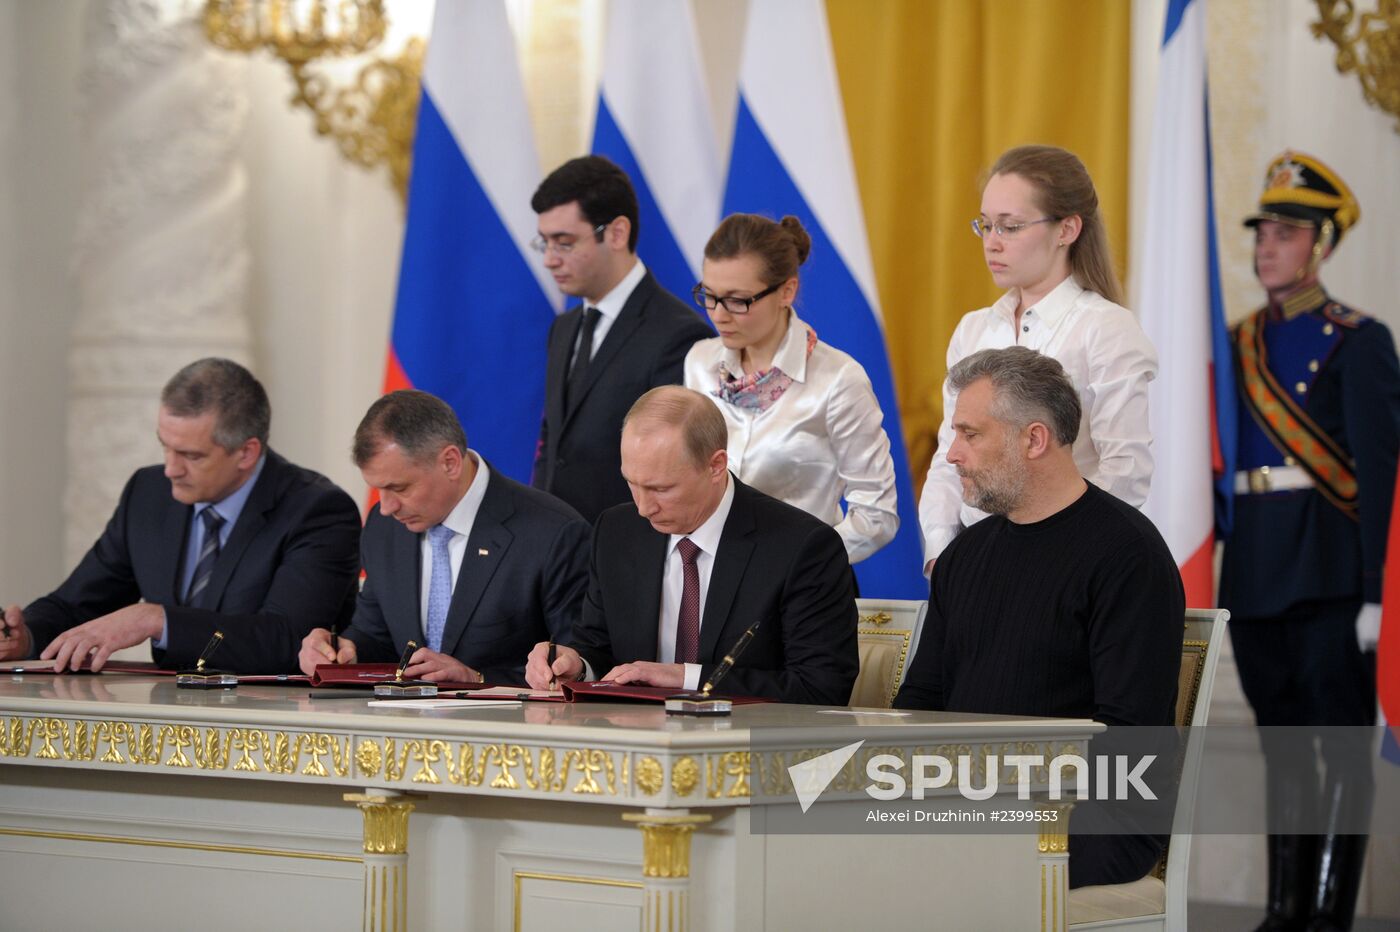 Signing Russian Federation-Crimea Treaty on Crimea's integration with Russia and formation of new jurisdictions in Russian Federation